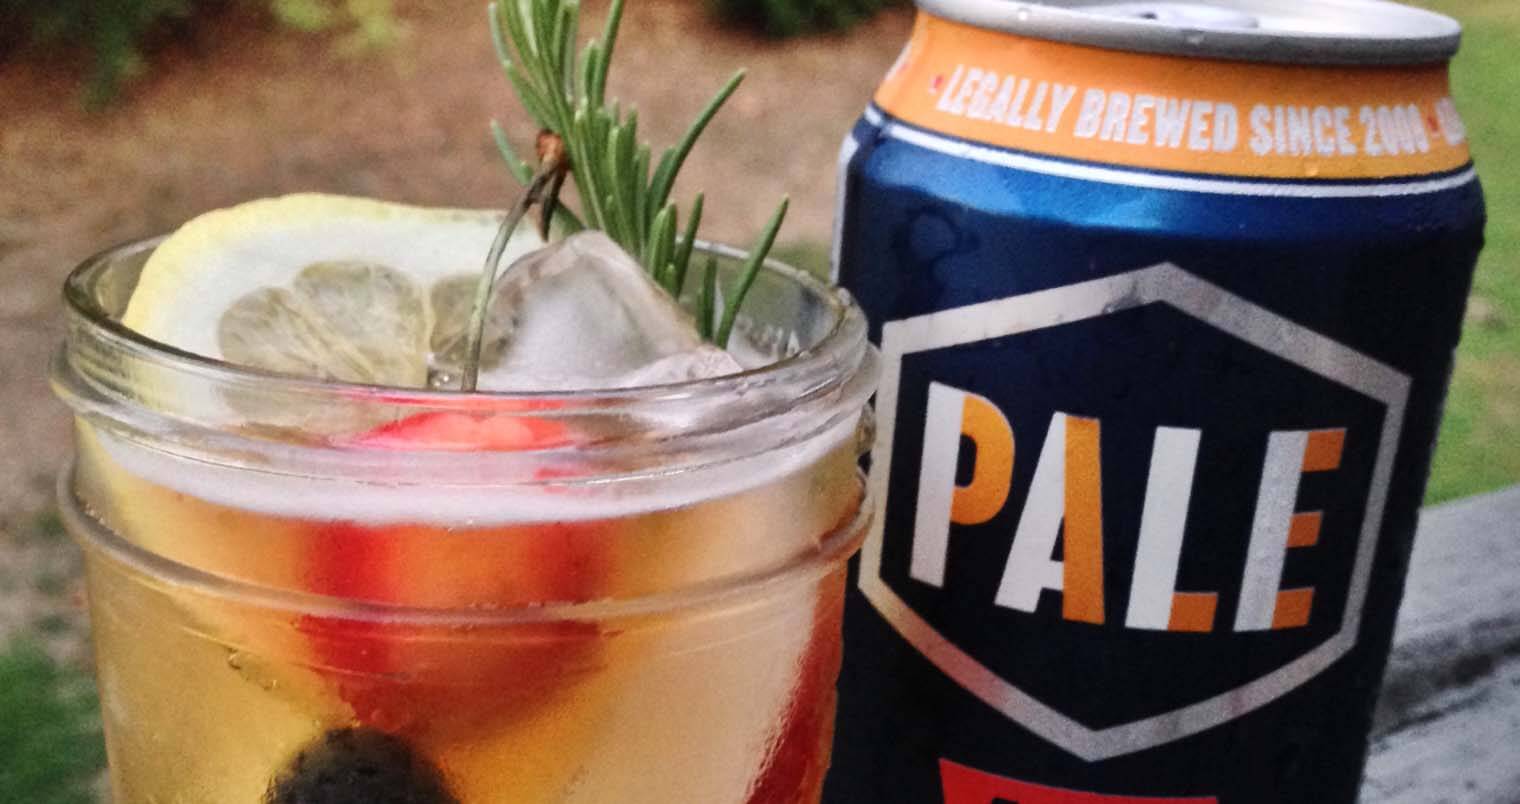 Share Summer Beer Cocktails with Good People